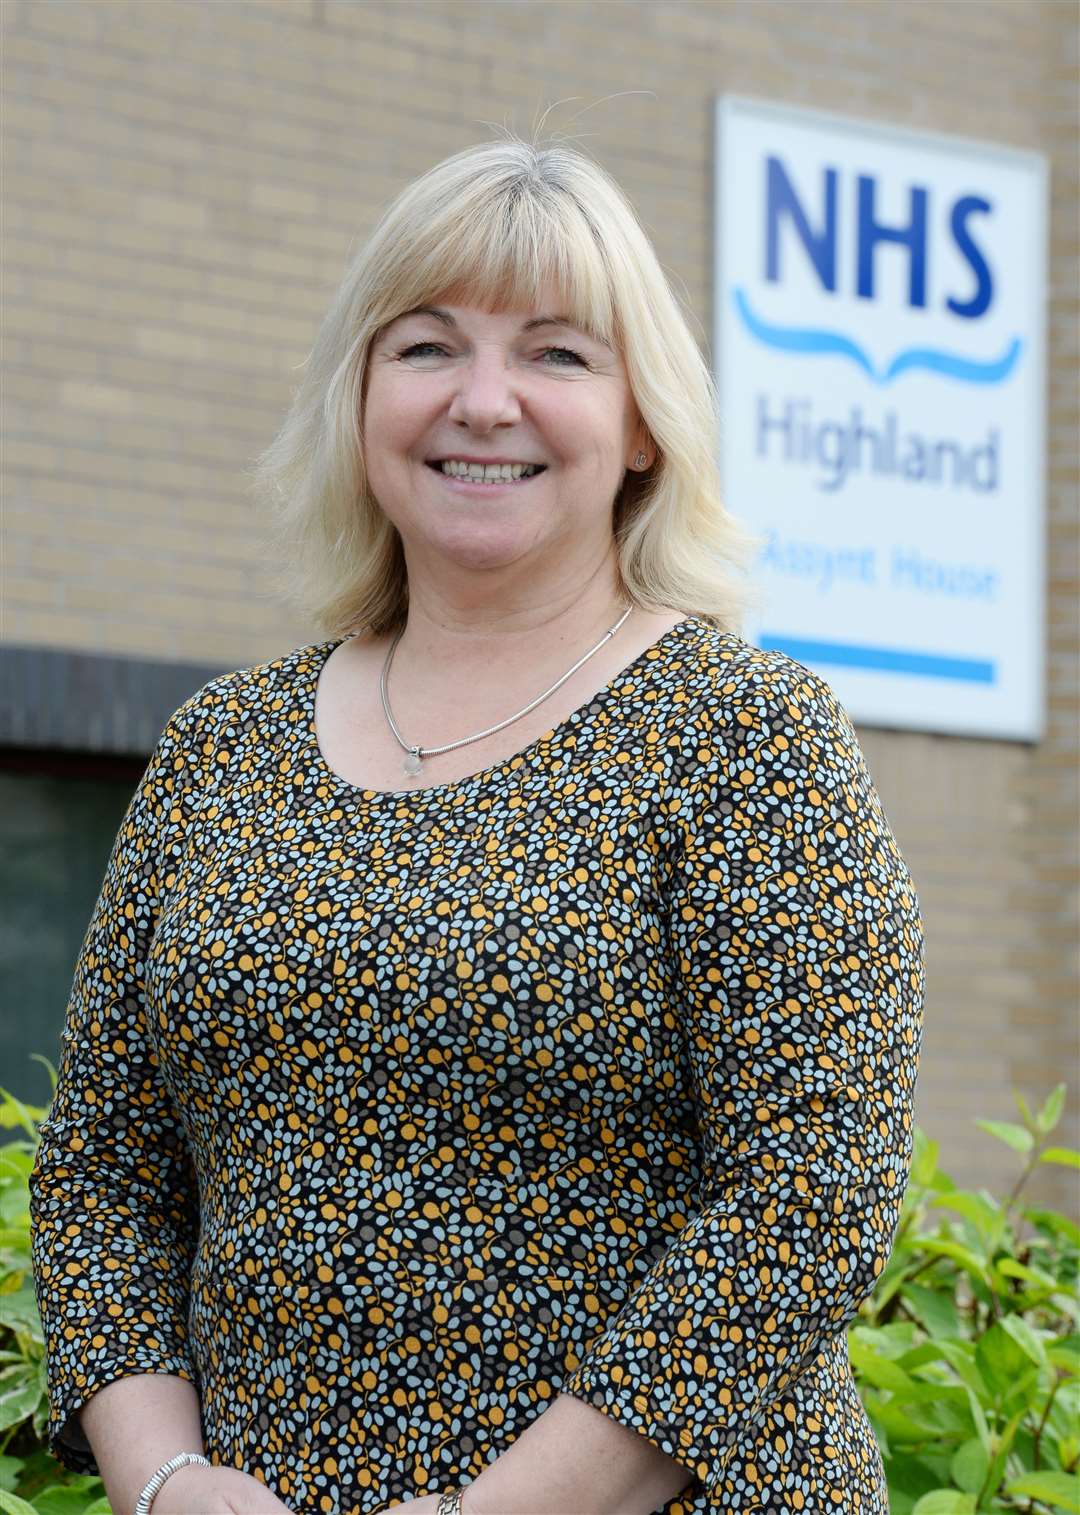 Pam Dudek, NHS Highland chief executive, is to retire in March